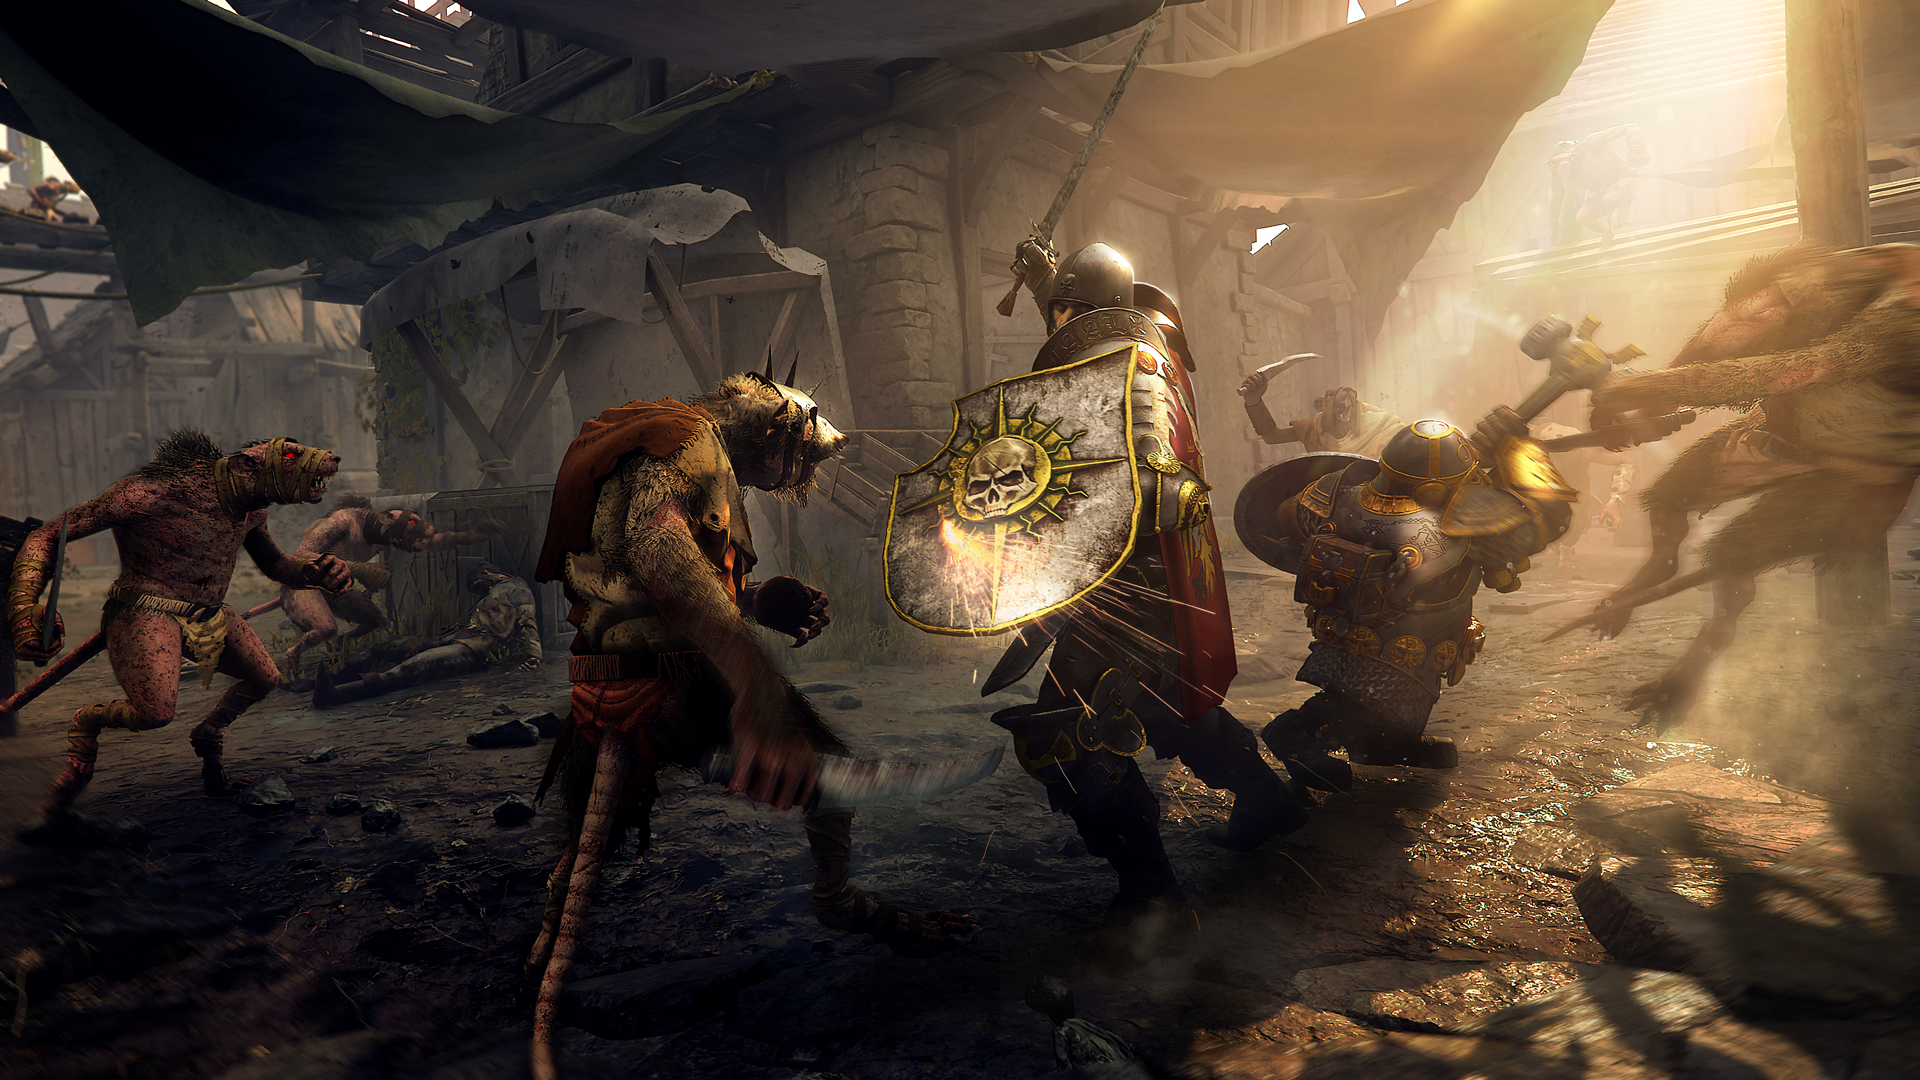 Vermintide 2 gets to the heart of what made the Warhammer books brilliant